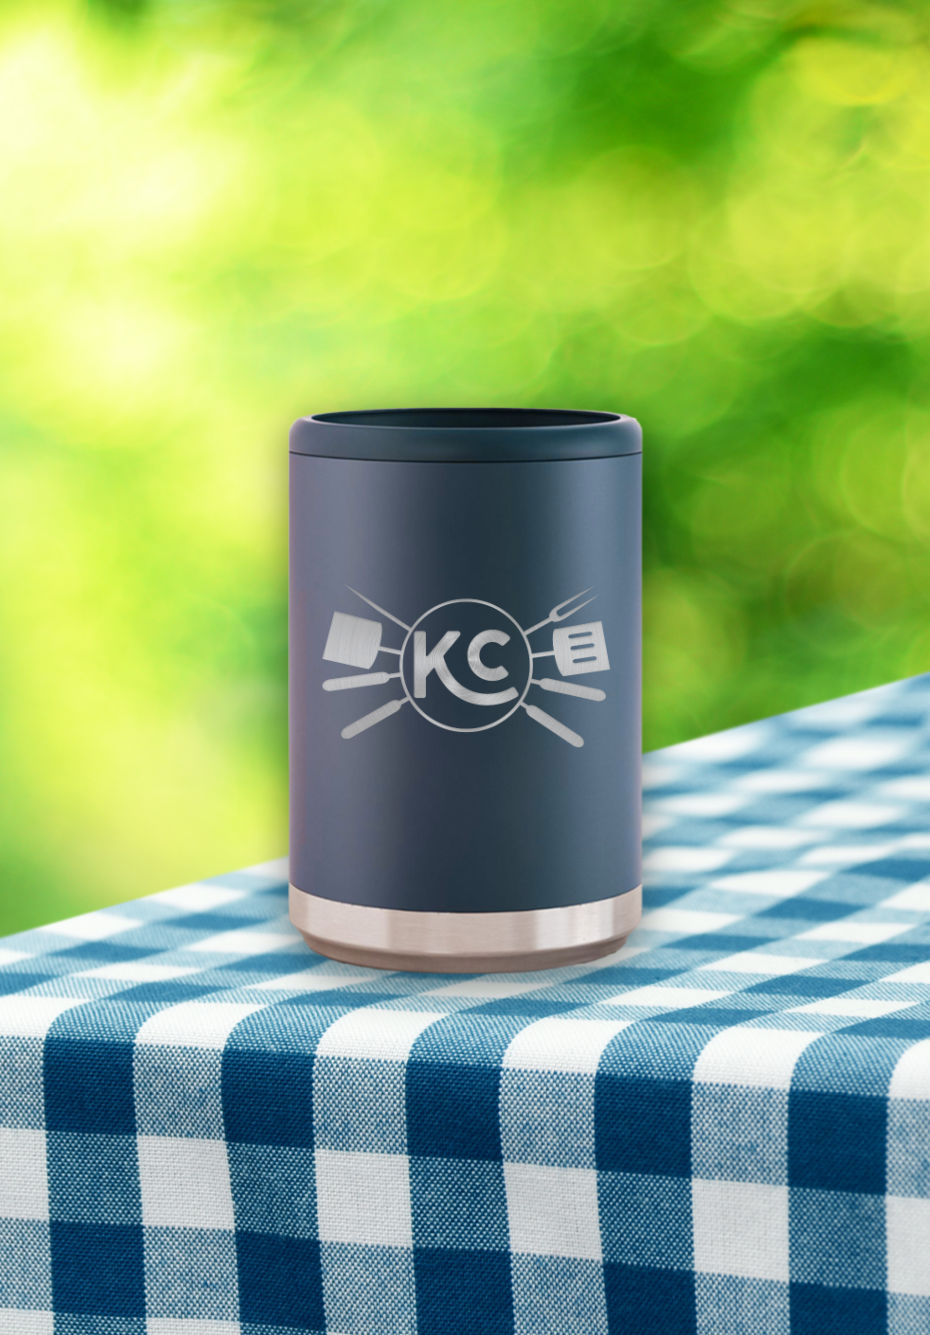 Etched metal can cooler on a blue and white checked tablecloth outdoors